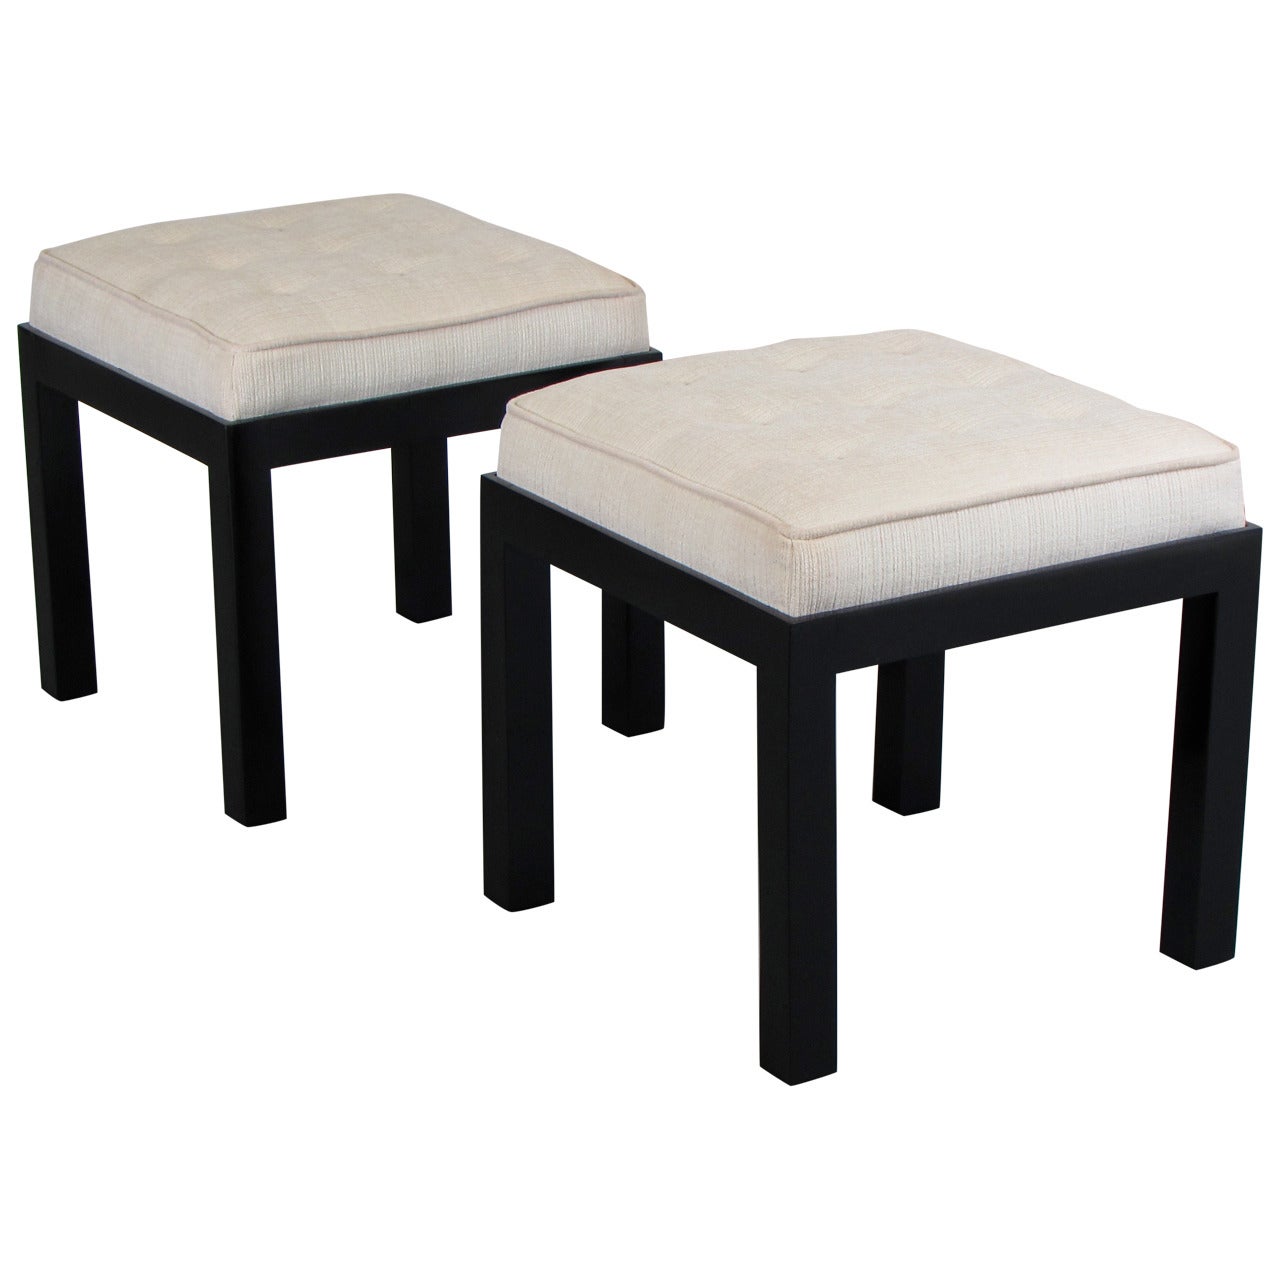 Handsome Upholstered Stools or Benches in the Style of Harvey Probber, 1960s